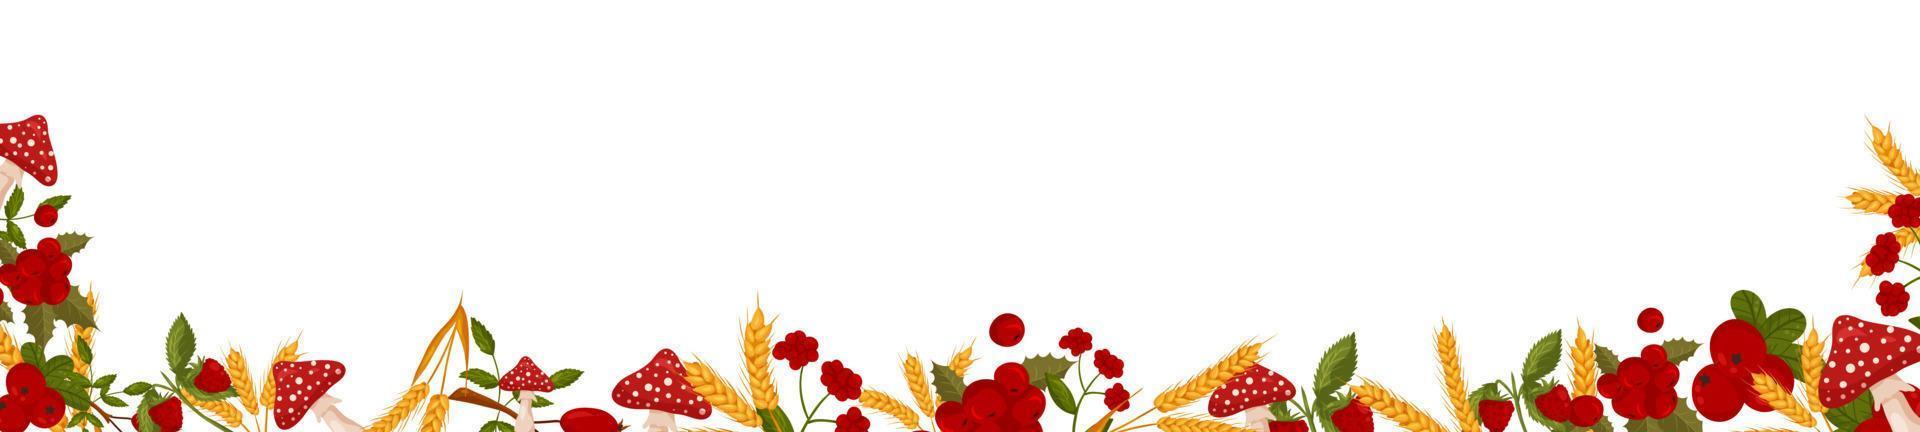 Spring horizontal frame with raspberries, cranberries and mushrooms, fly agarics. Summer vector banner